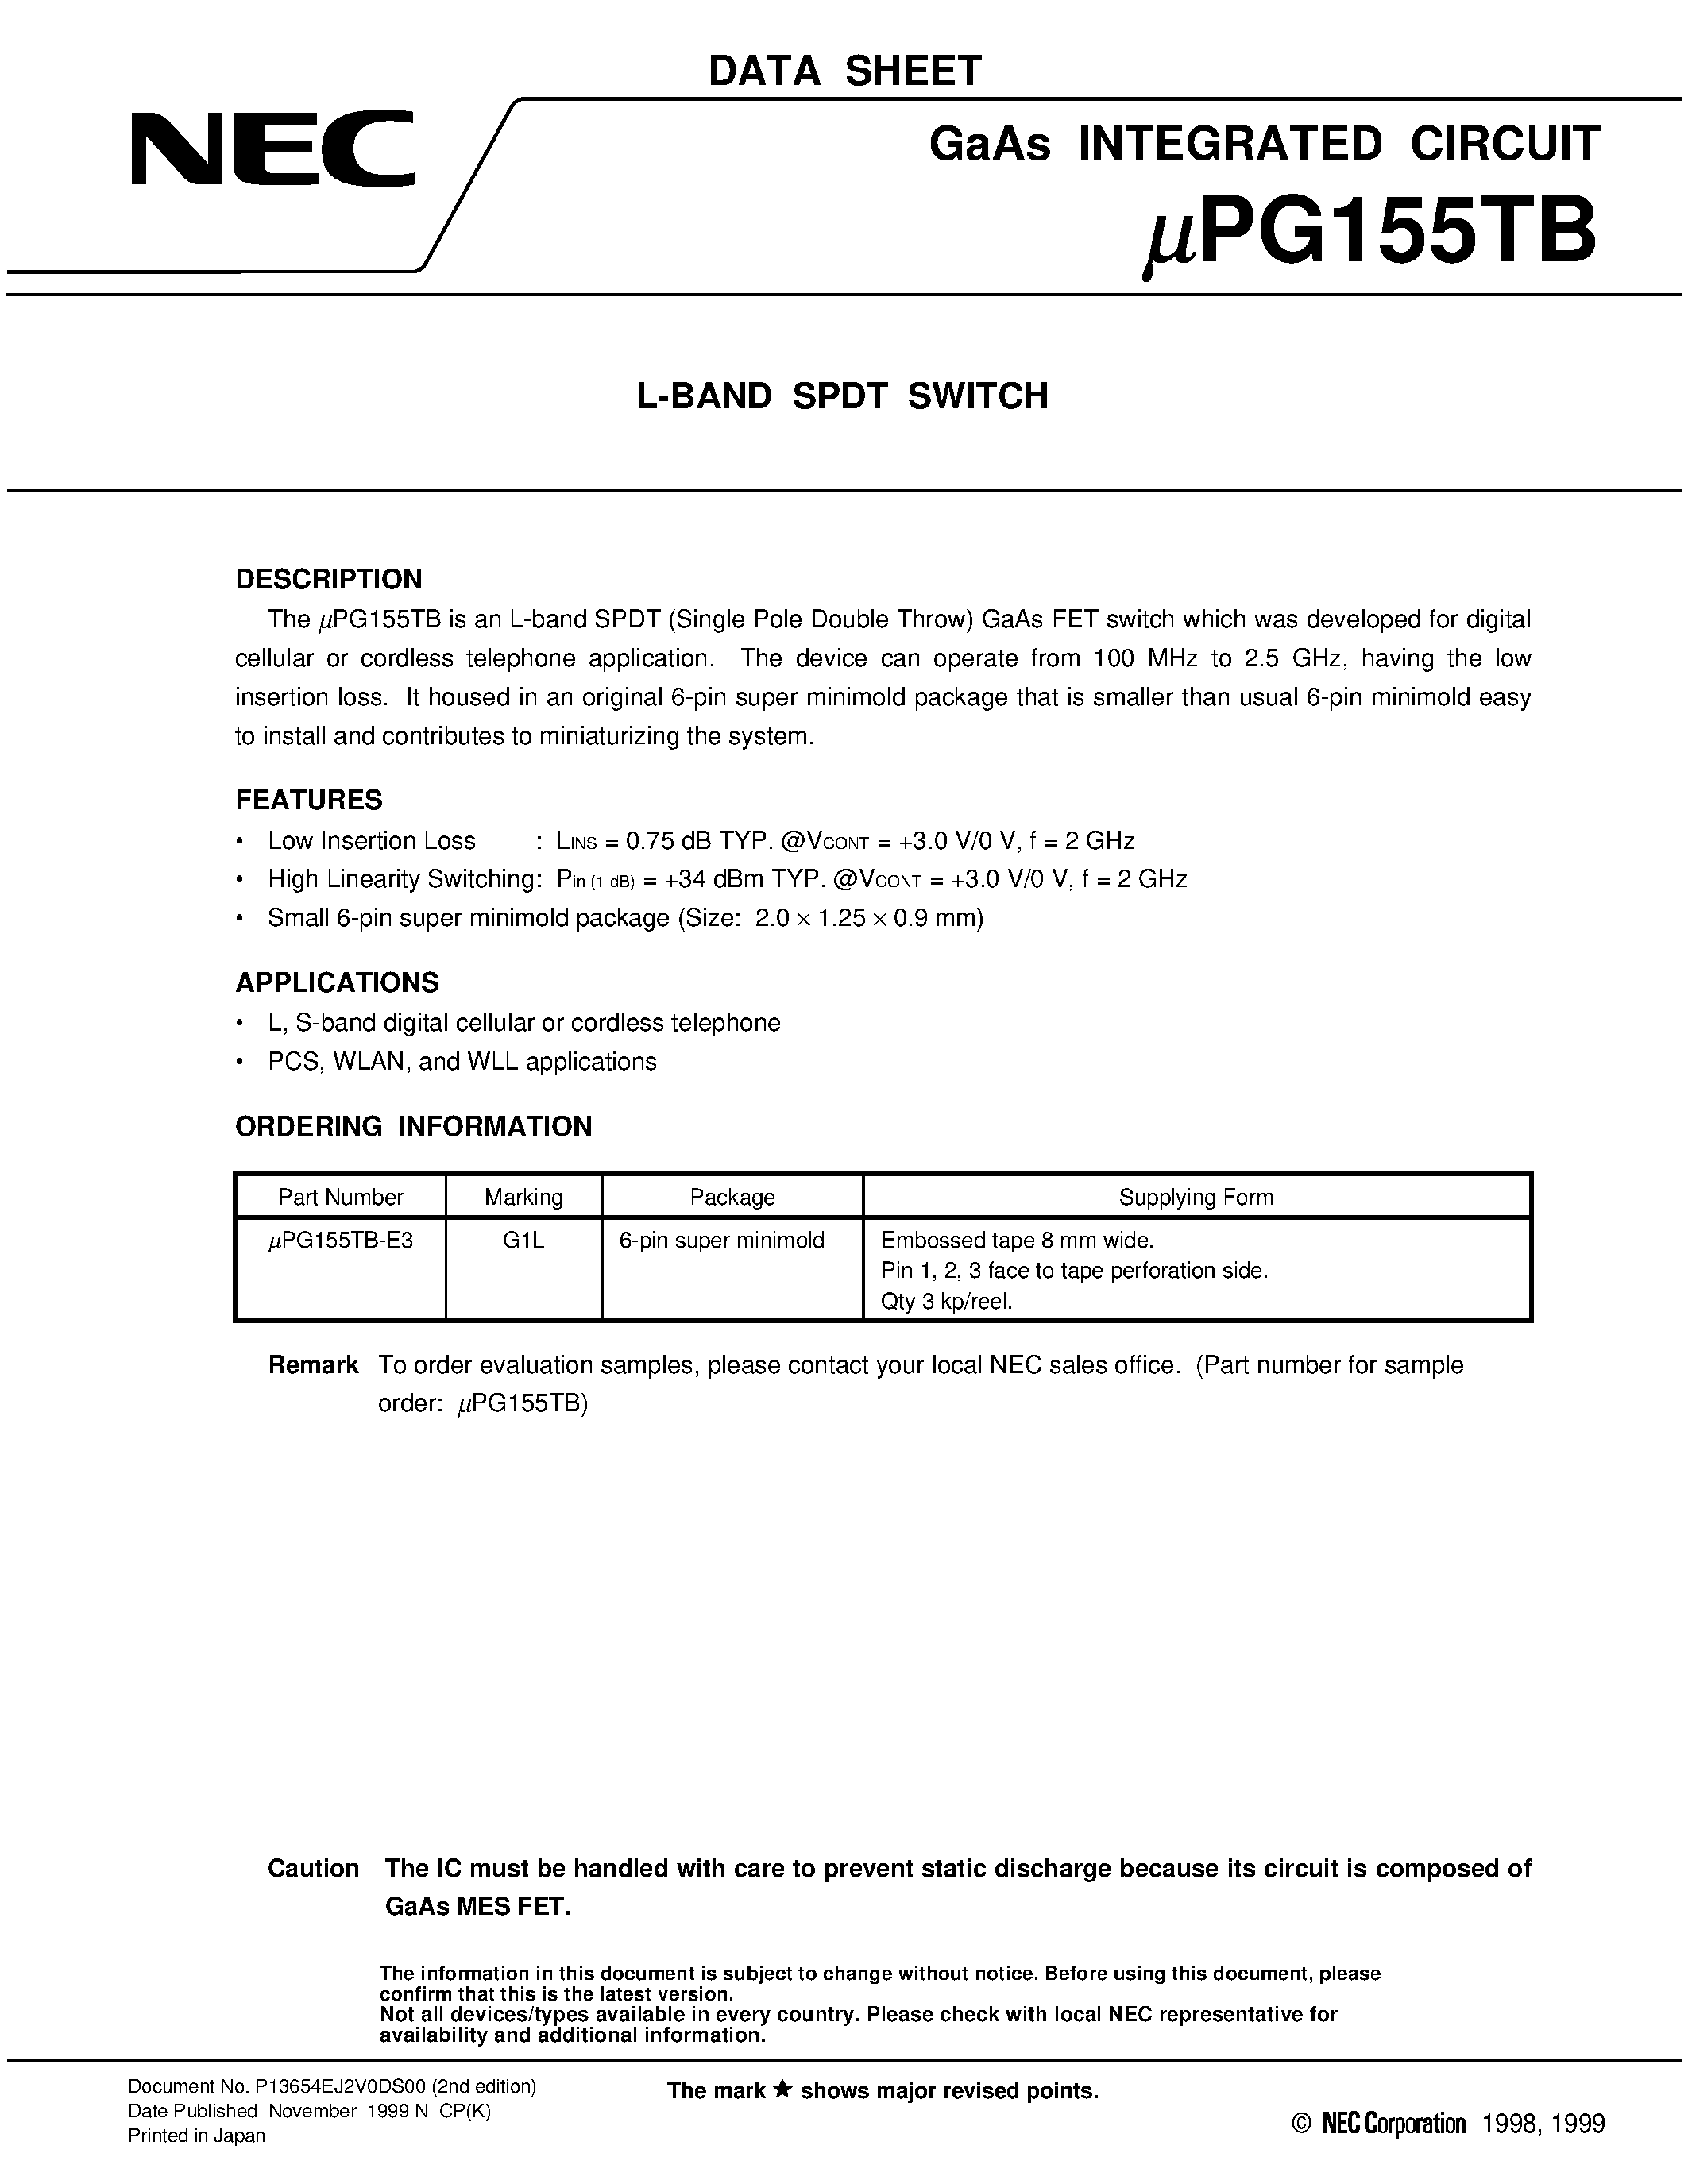 Datasheet UPG155TB - L-BAND SPDT SWITCH page 1